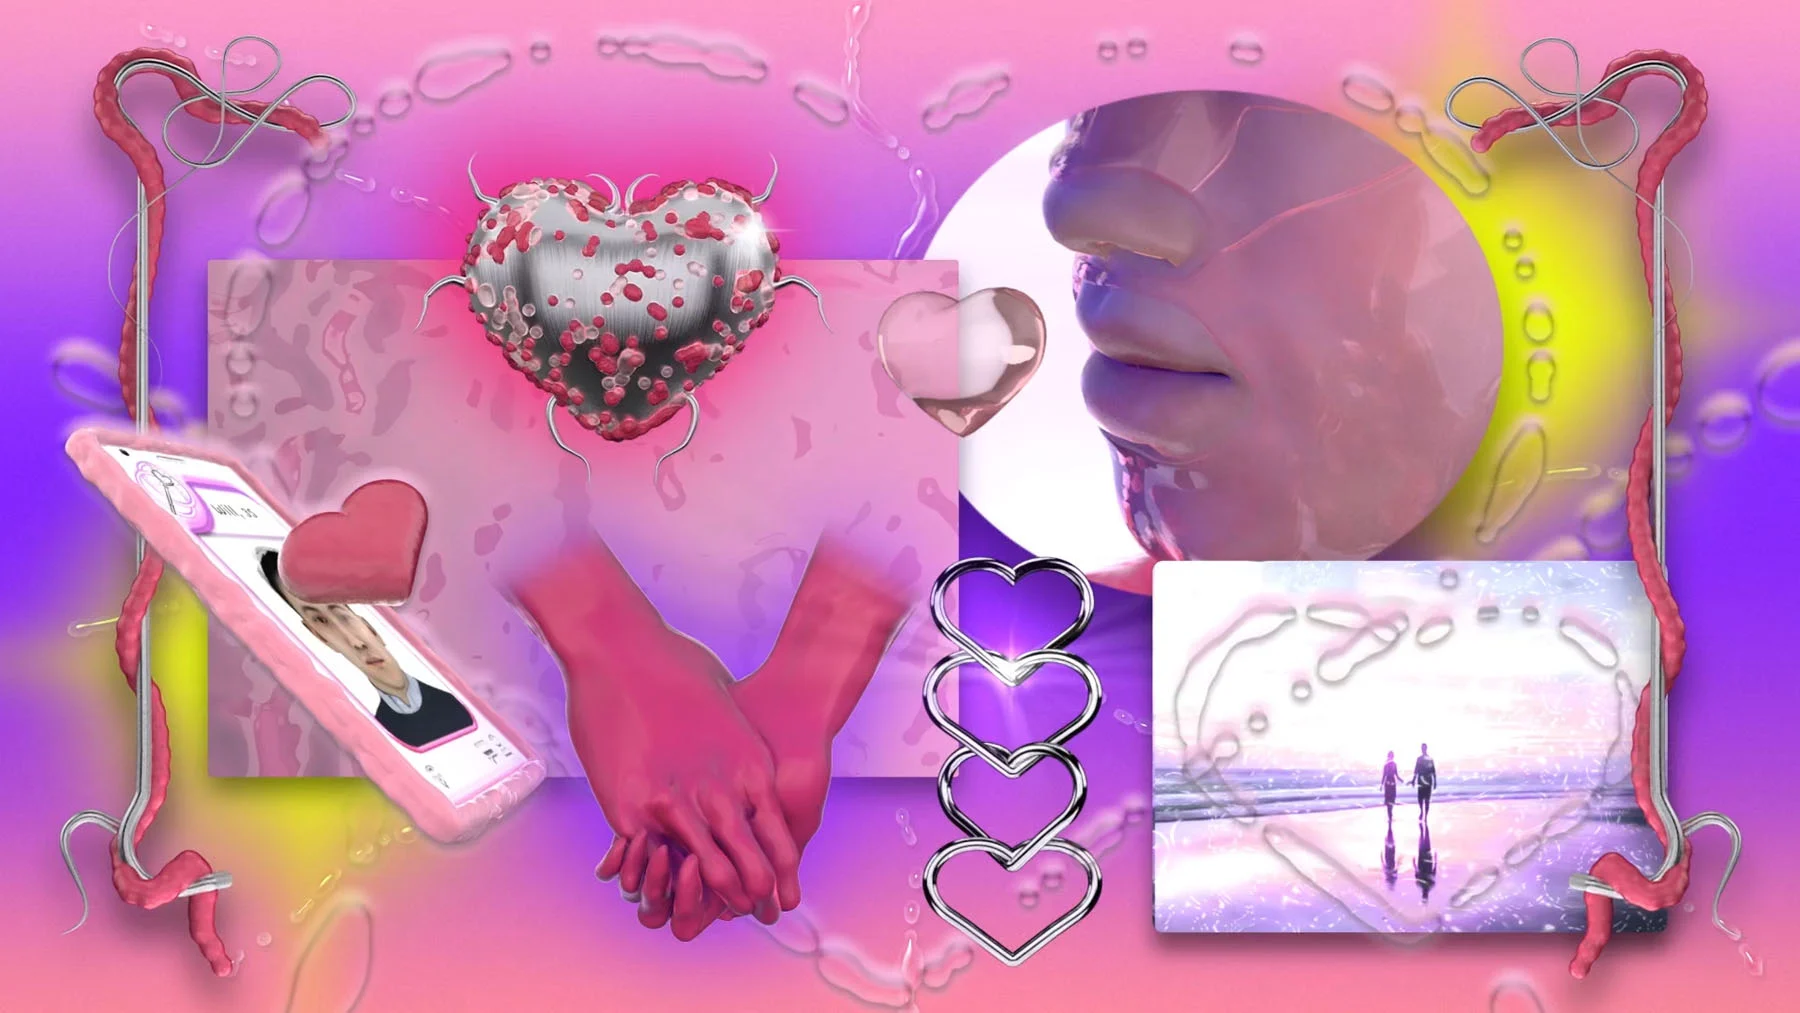 An animated horizontal collage illustrating layered CGI elements on a purple and pink gradient background with yellow accents. The collage includes metallic and gooey pink objects, a phone displaying a dating app interface, a couple strolling hand in hand on a beach and a close-up of a person's face with a content expression. The elements move in a looping motion.